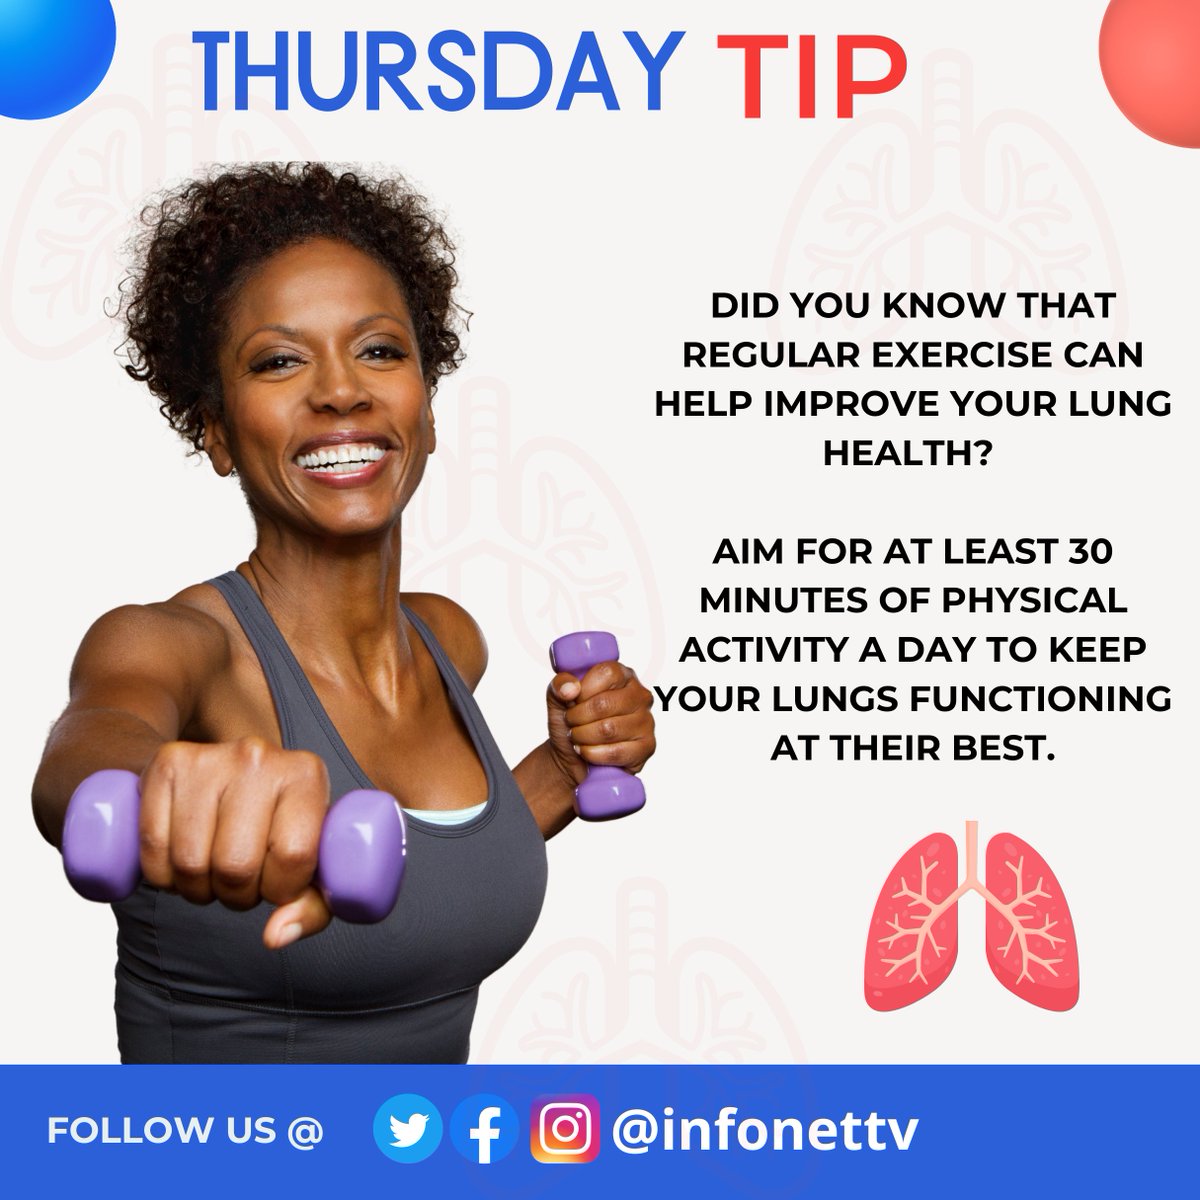 Did you know that regular exercise can help improve your lung health? 

Aim for at least 30 minutes of physical activity a day to keep your lungs functioning at their best. #Health #HealthyLiving #healthylifestyle #Thursdaytip